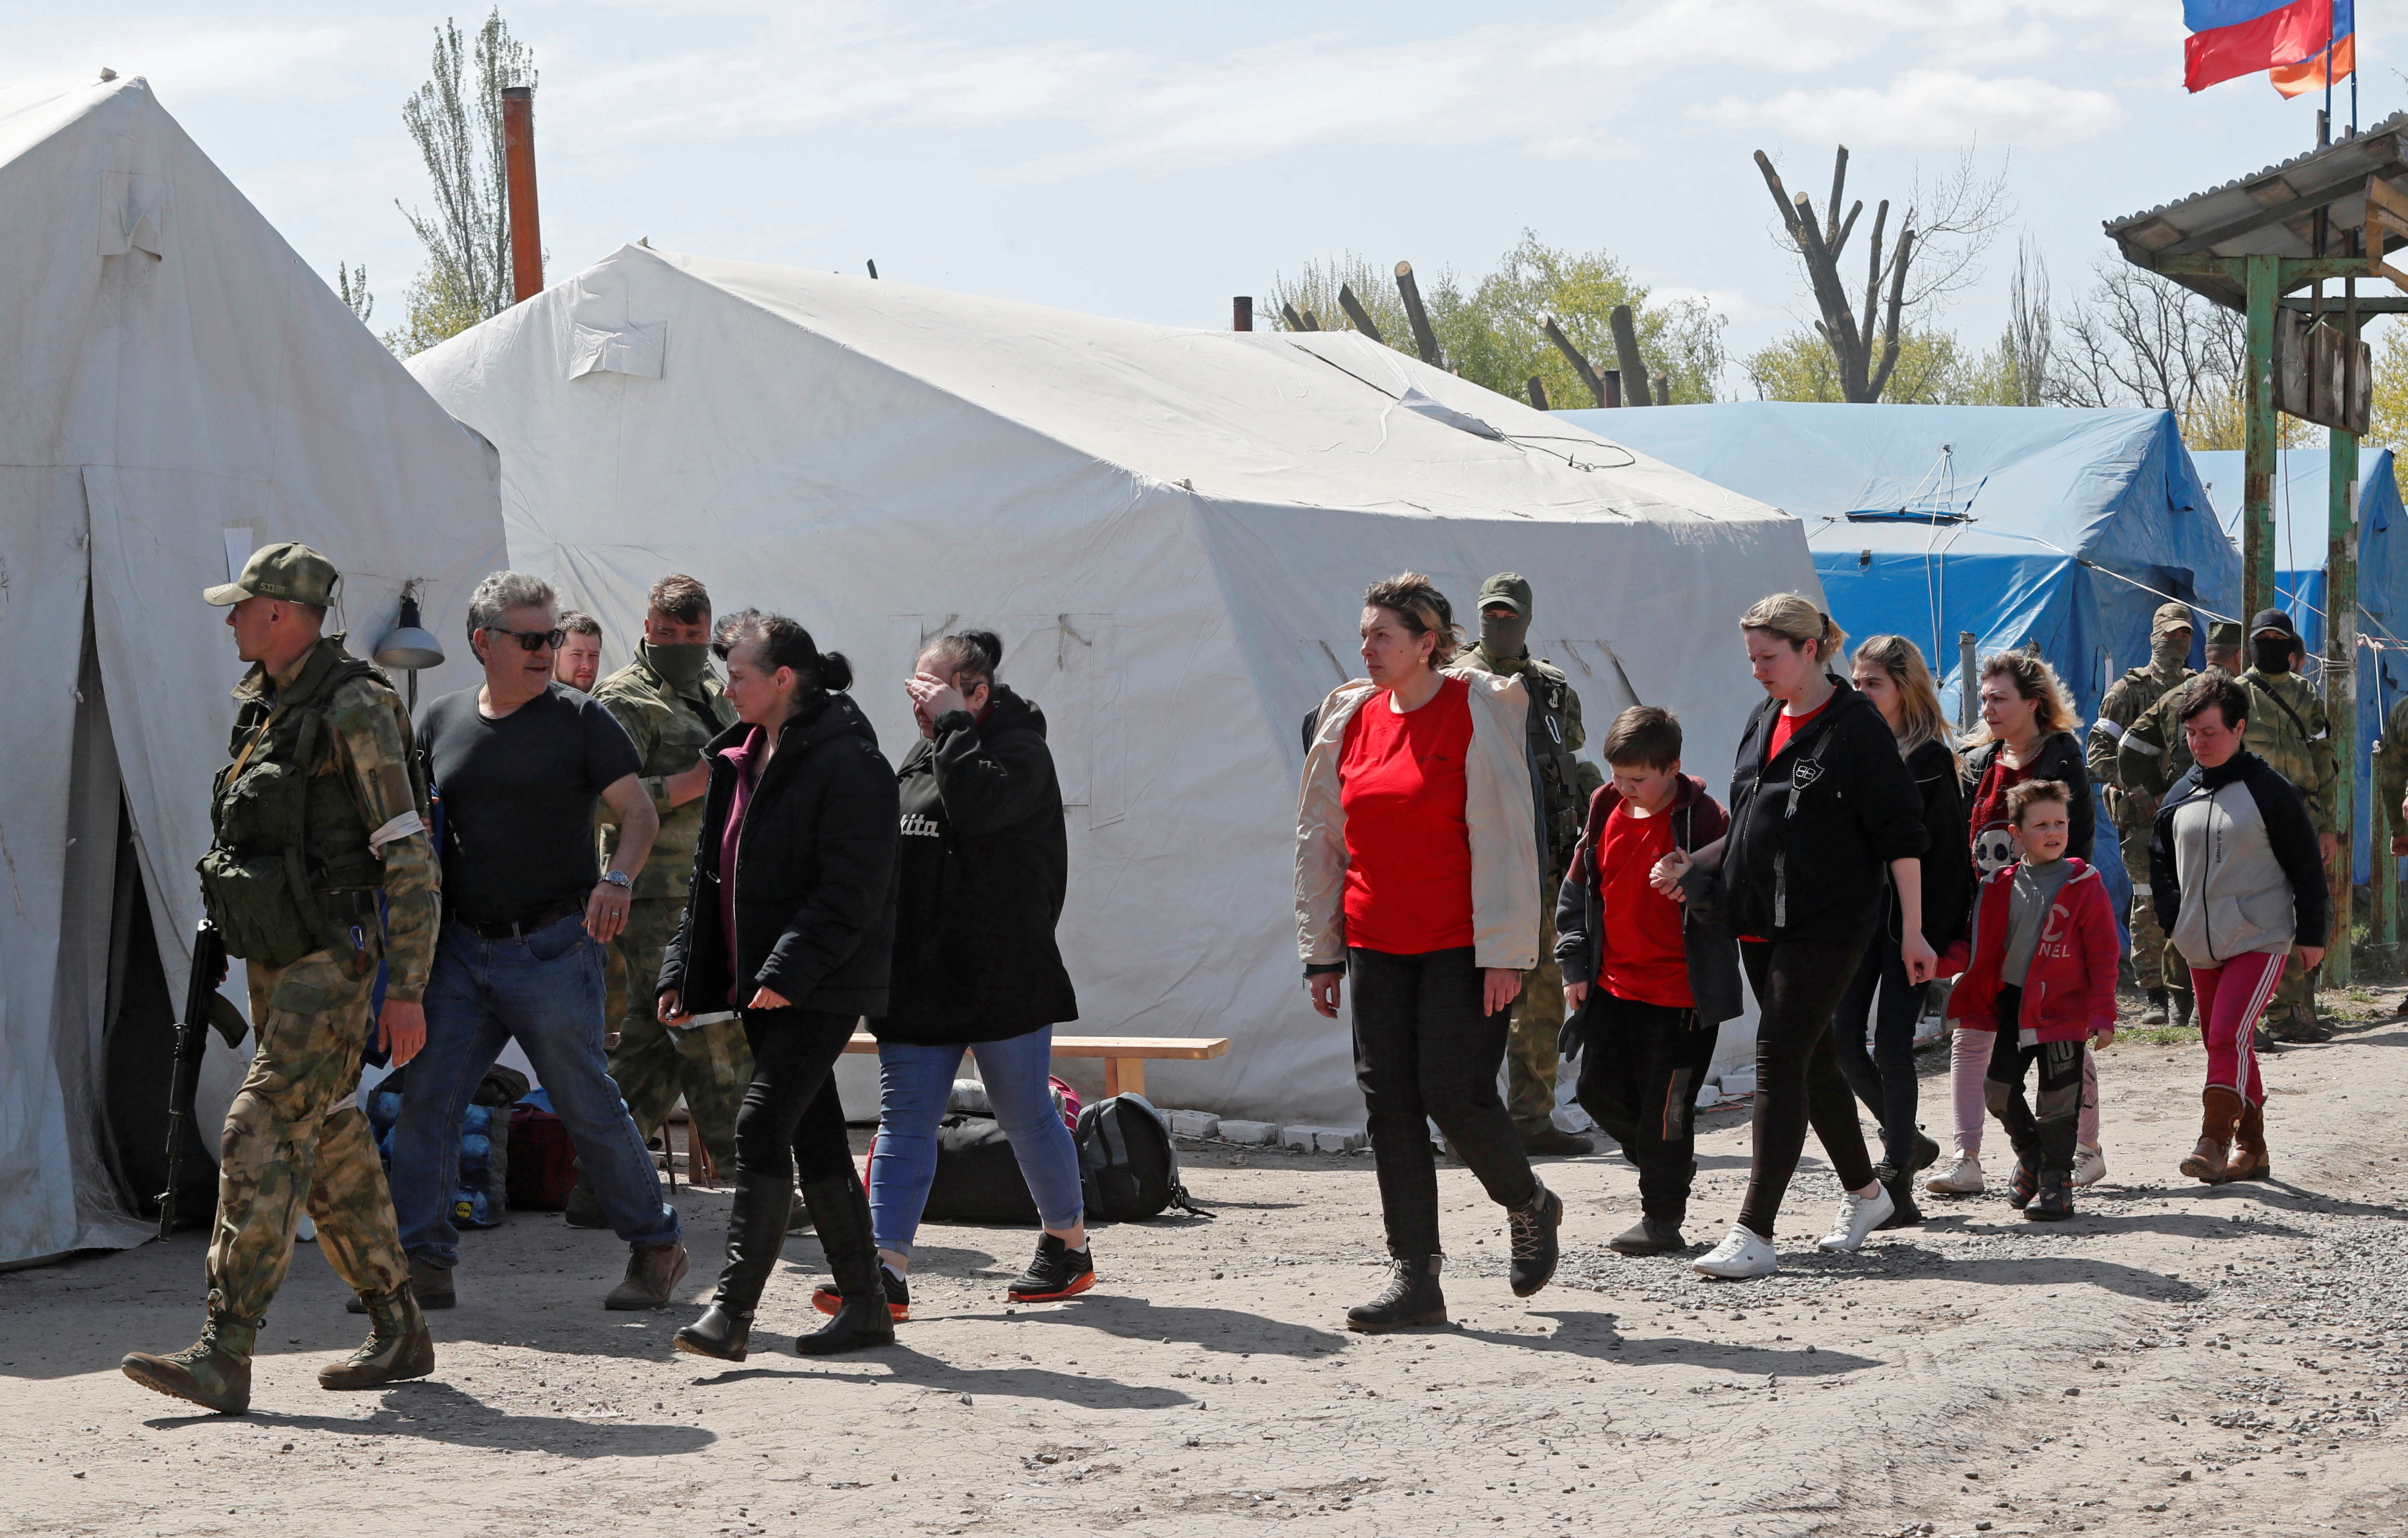 Civilians who left the area near Azovstal steel plant in Mariupol walk at a temporary accommodation centre in Bezimenne